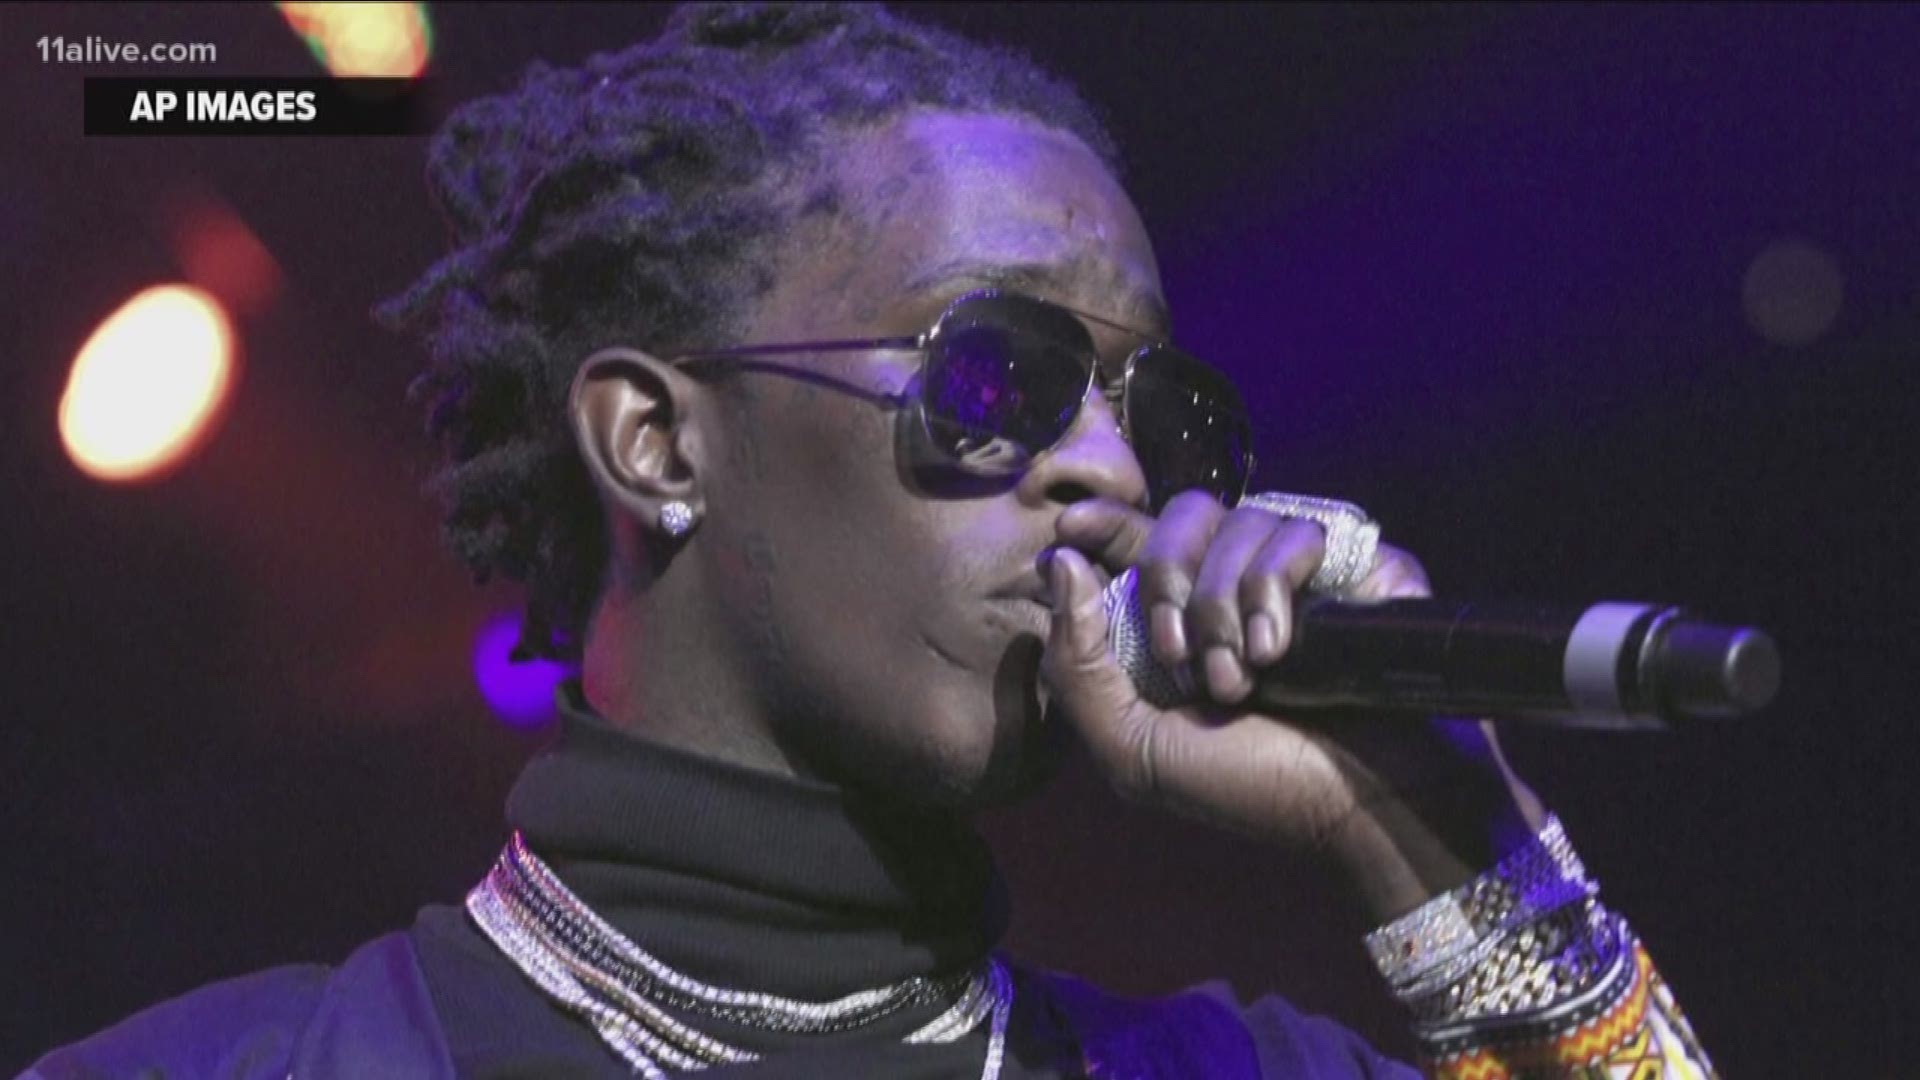 Evidence against the Atlanta rapper, Young Thug, was thrown out by a judge due to a question police couldn't answer.